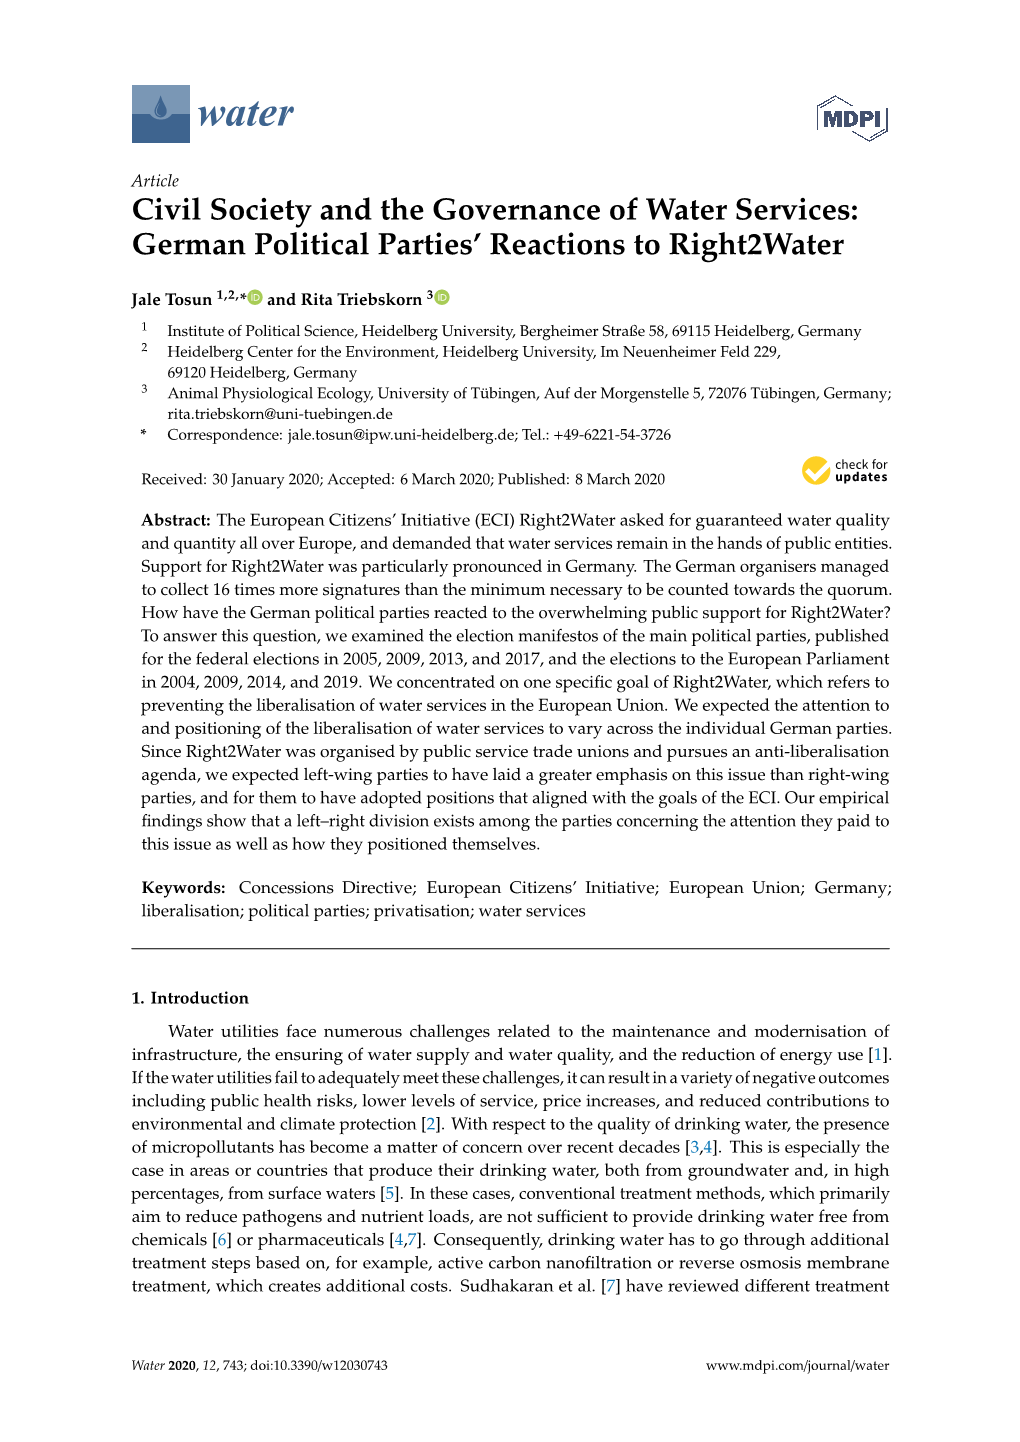 German Political Parties' Reactions to Right2water